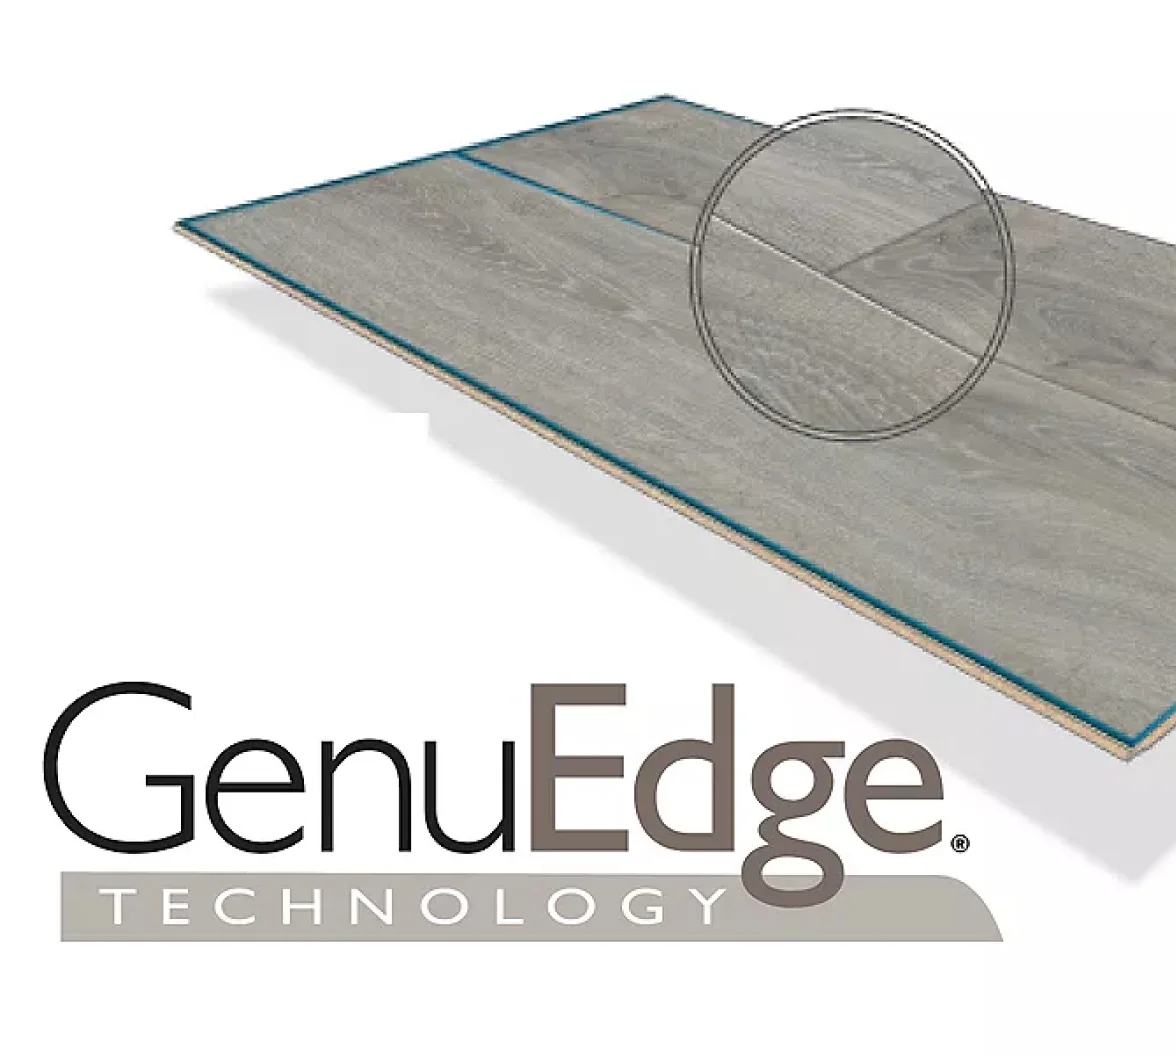 GenuEdge Technology gives the most realistic plank look to RevWood flooring products.